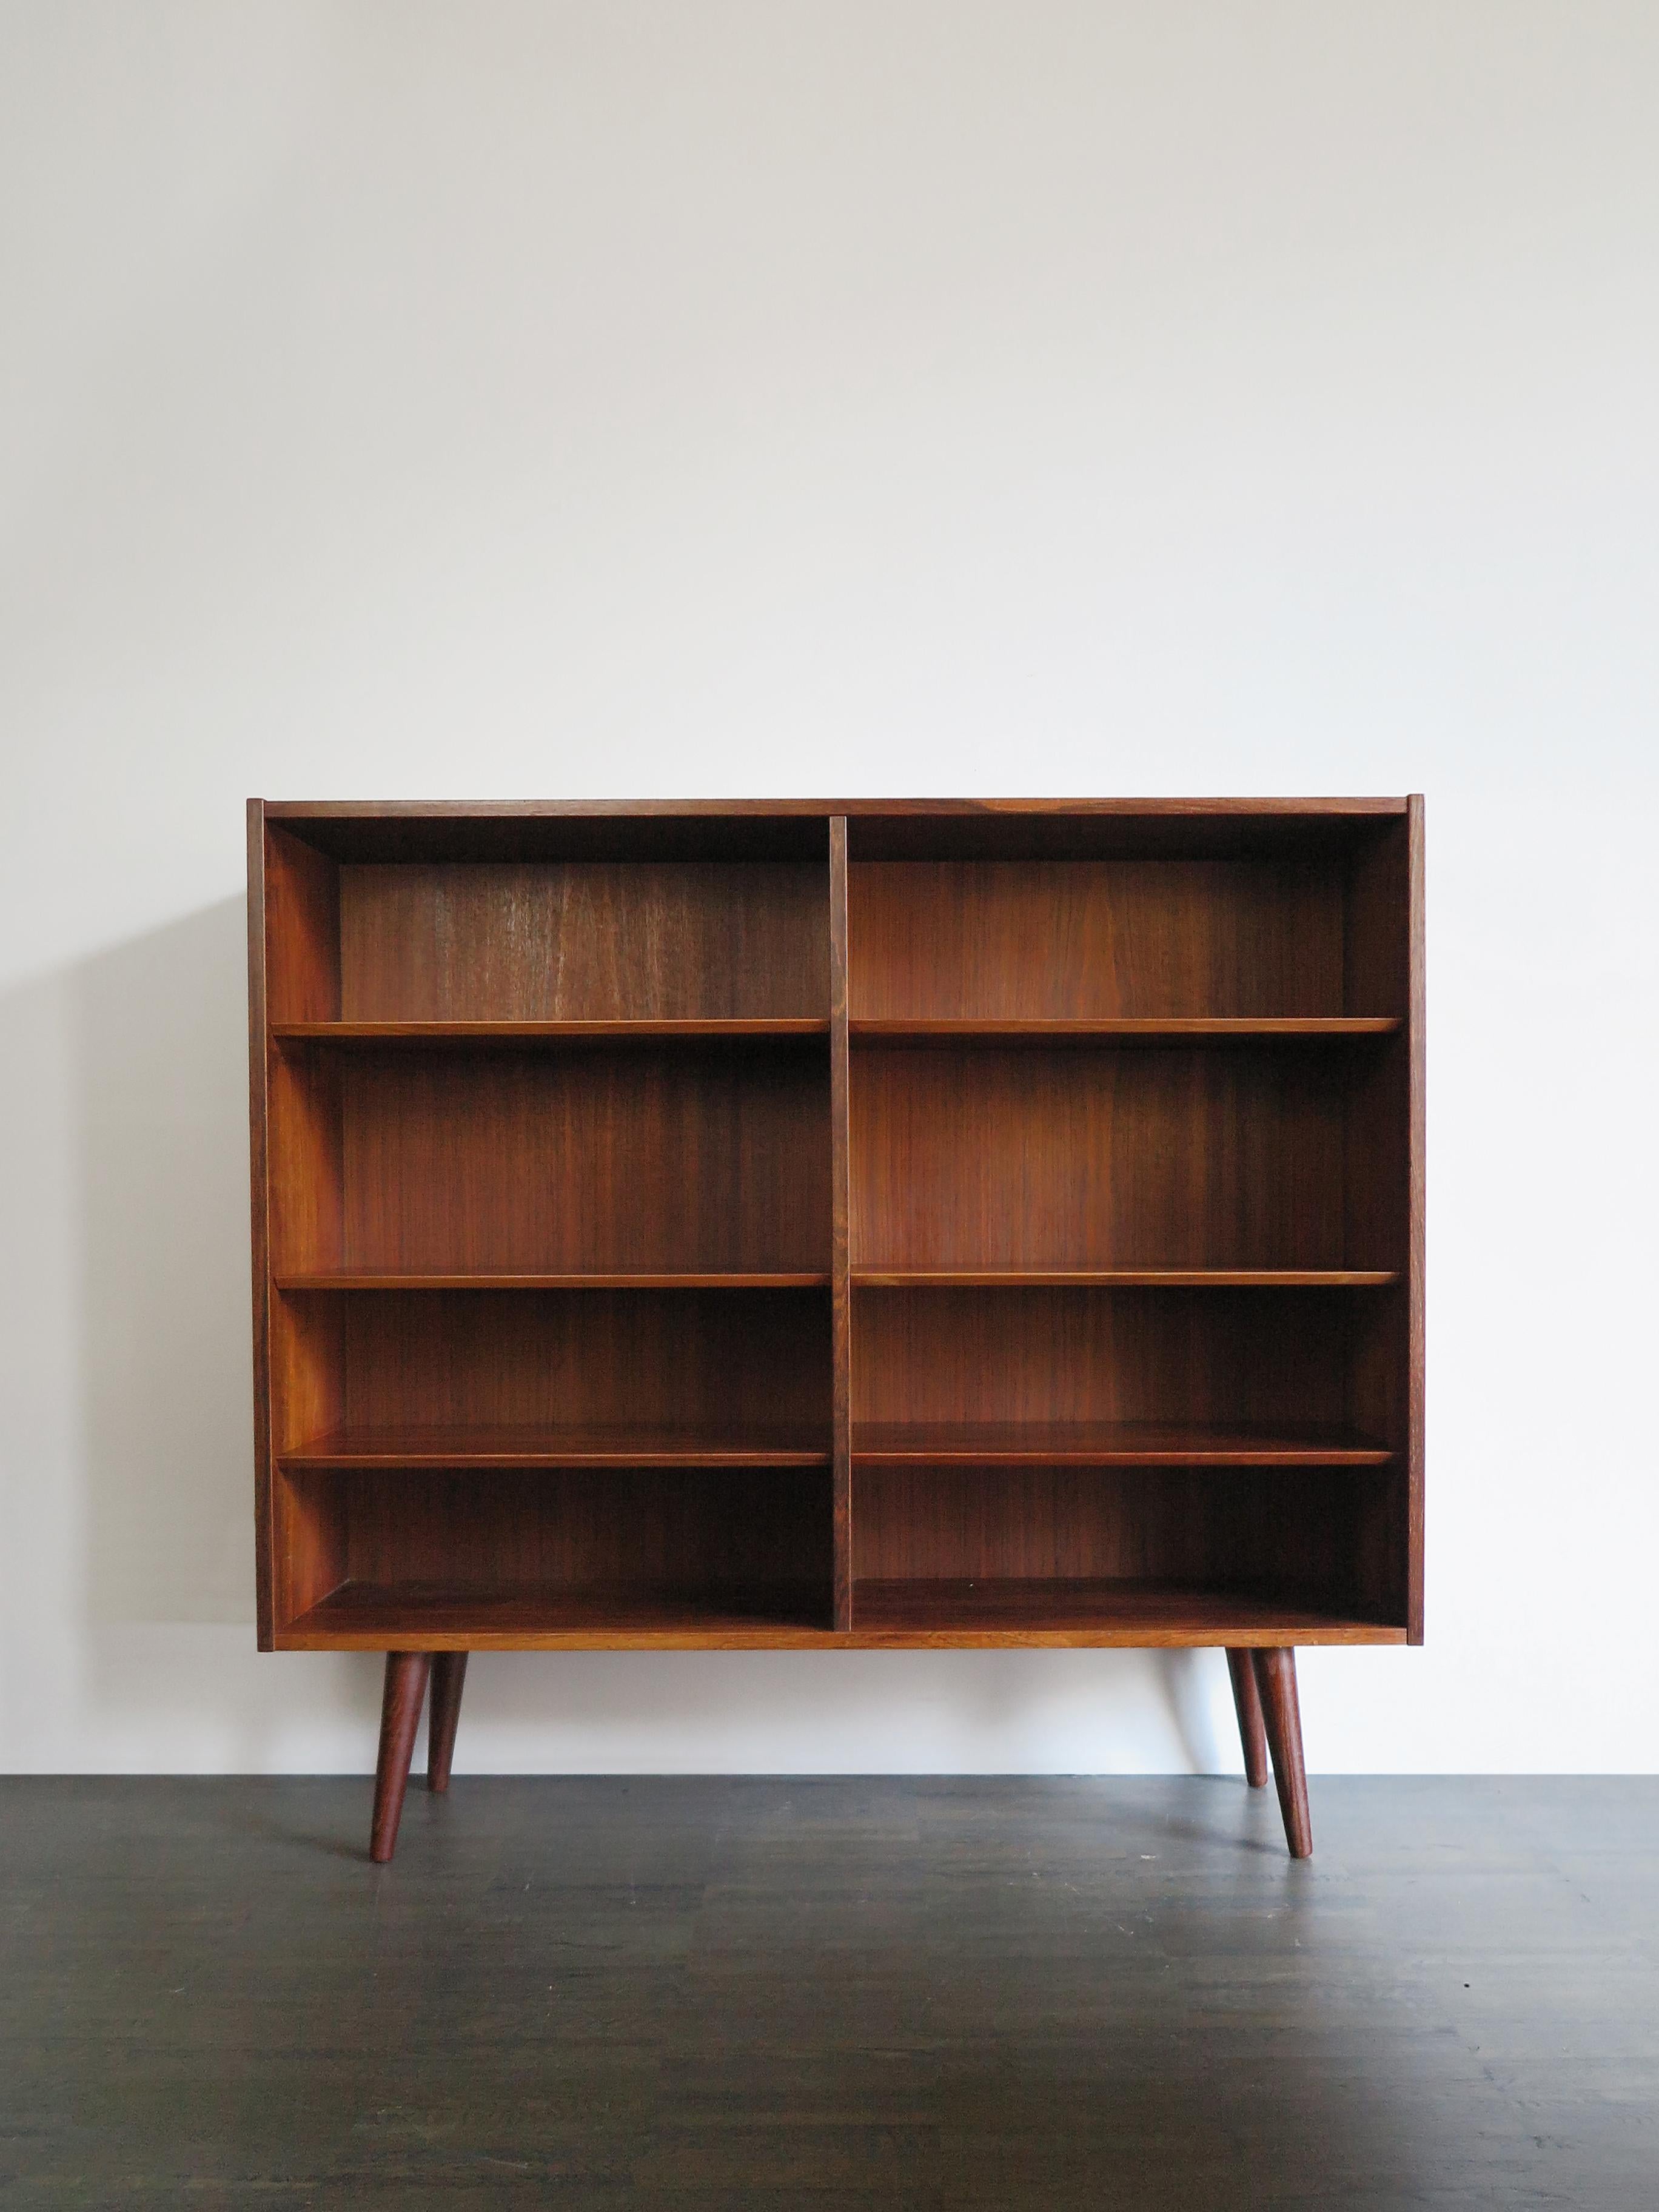 Scandinavian Mid-Century Modern design darkwood bookcase designed by Poul Hundevad and produced by Hundevad Møbelfabrik in the 1960s, variable height position of shelves and manufacturer’s stamp on the back, Denmark 1960s

Please note that the